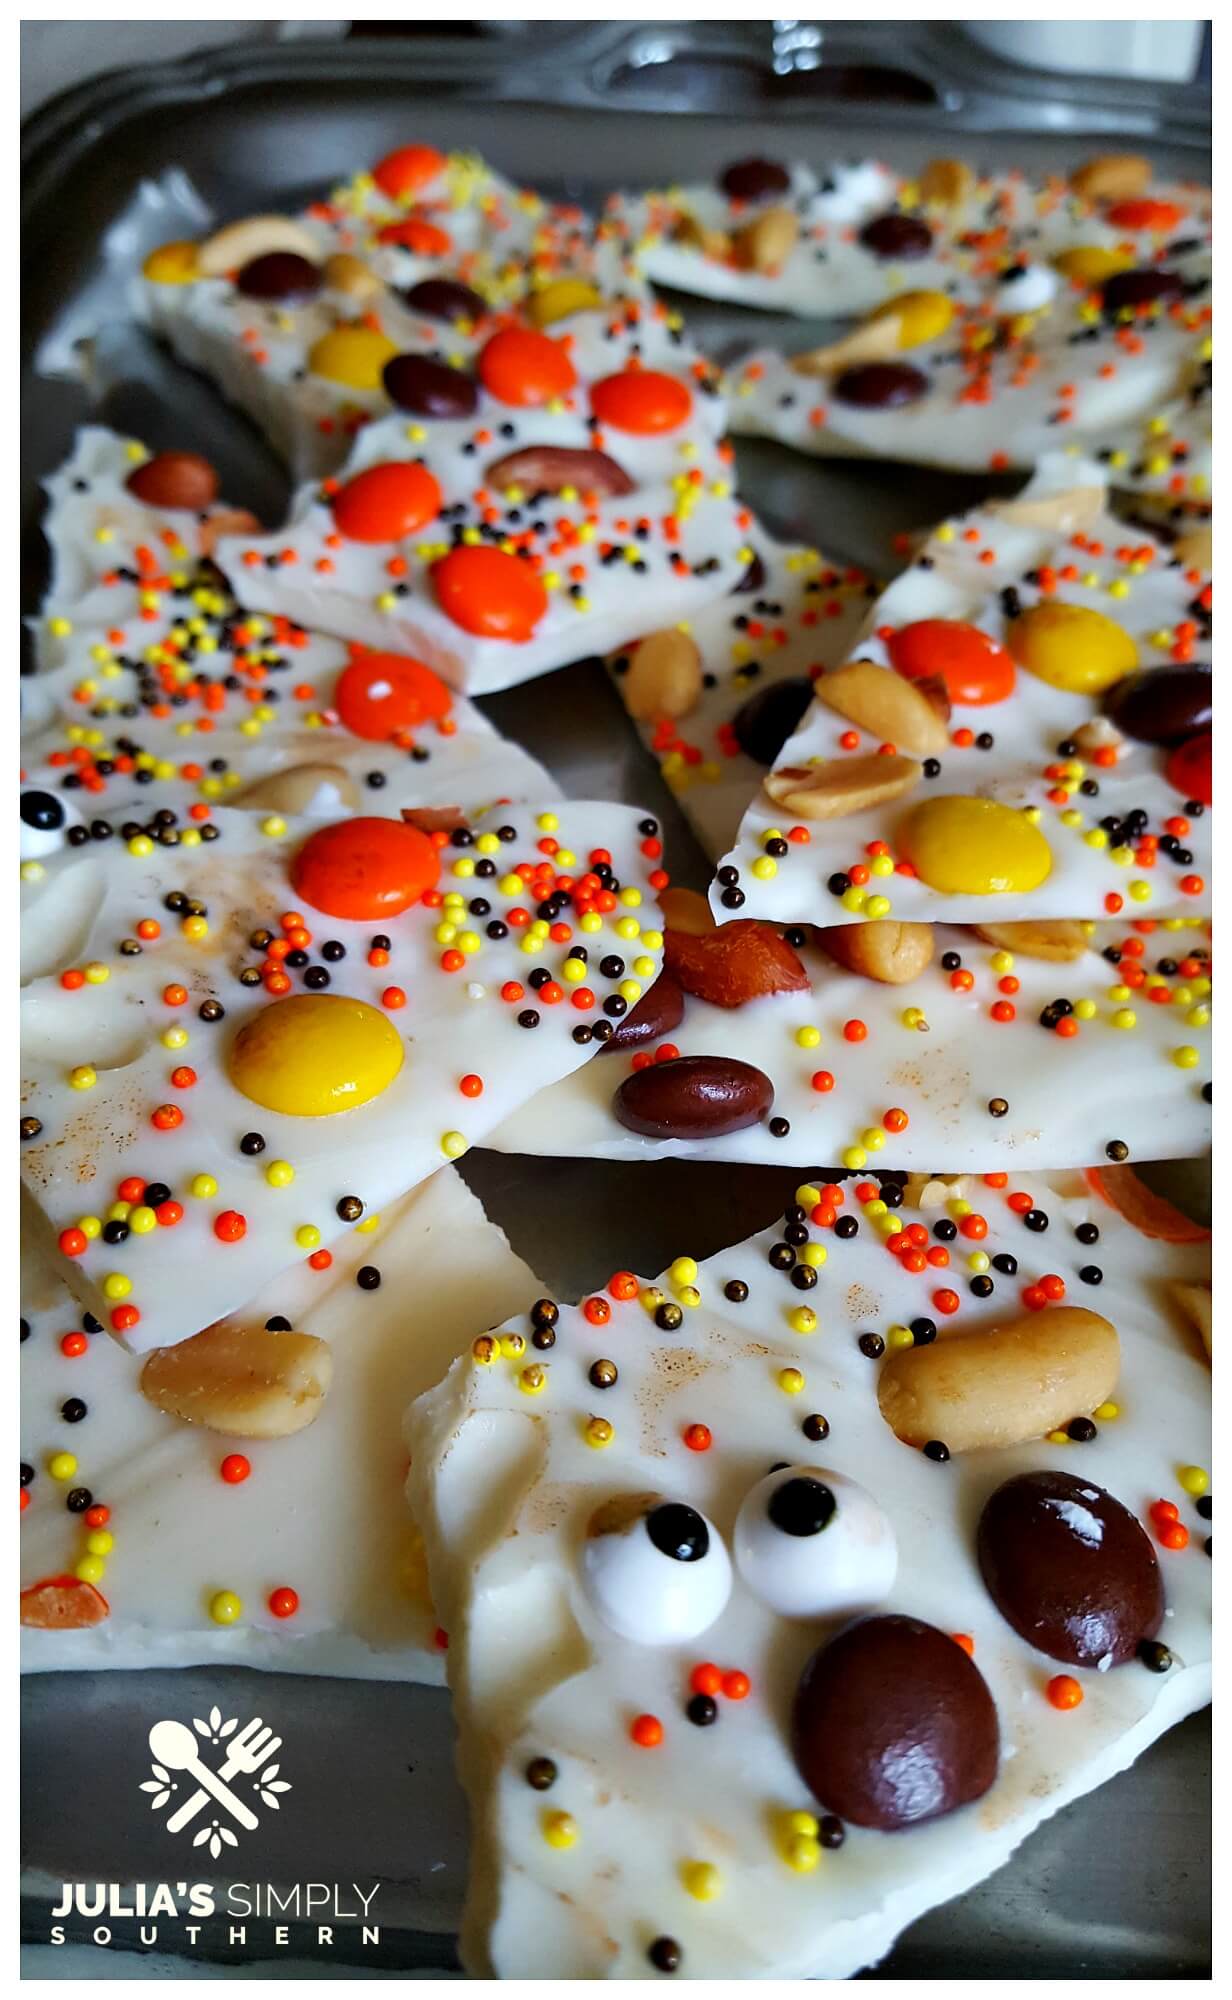 Fun cooking activity with kids for Halloween - Bark - Julia's Simply Southern